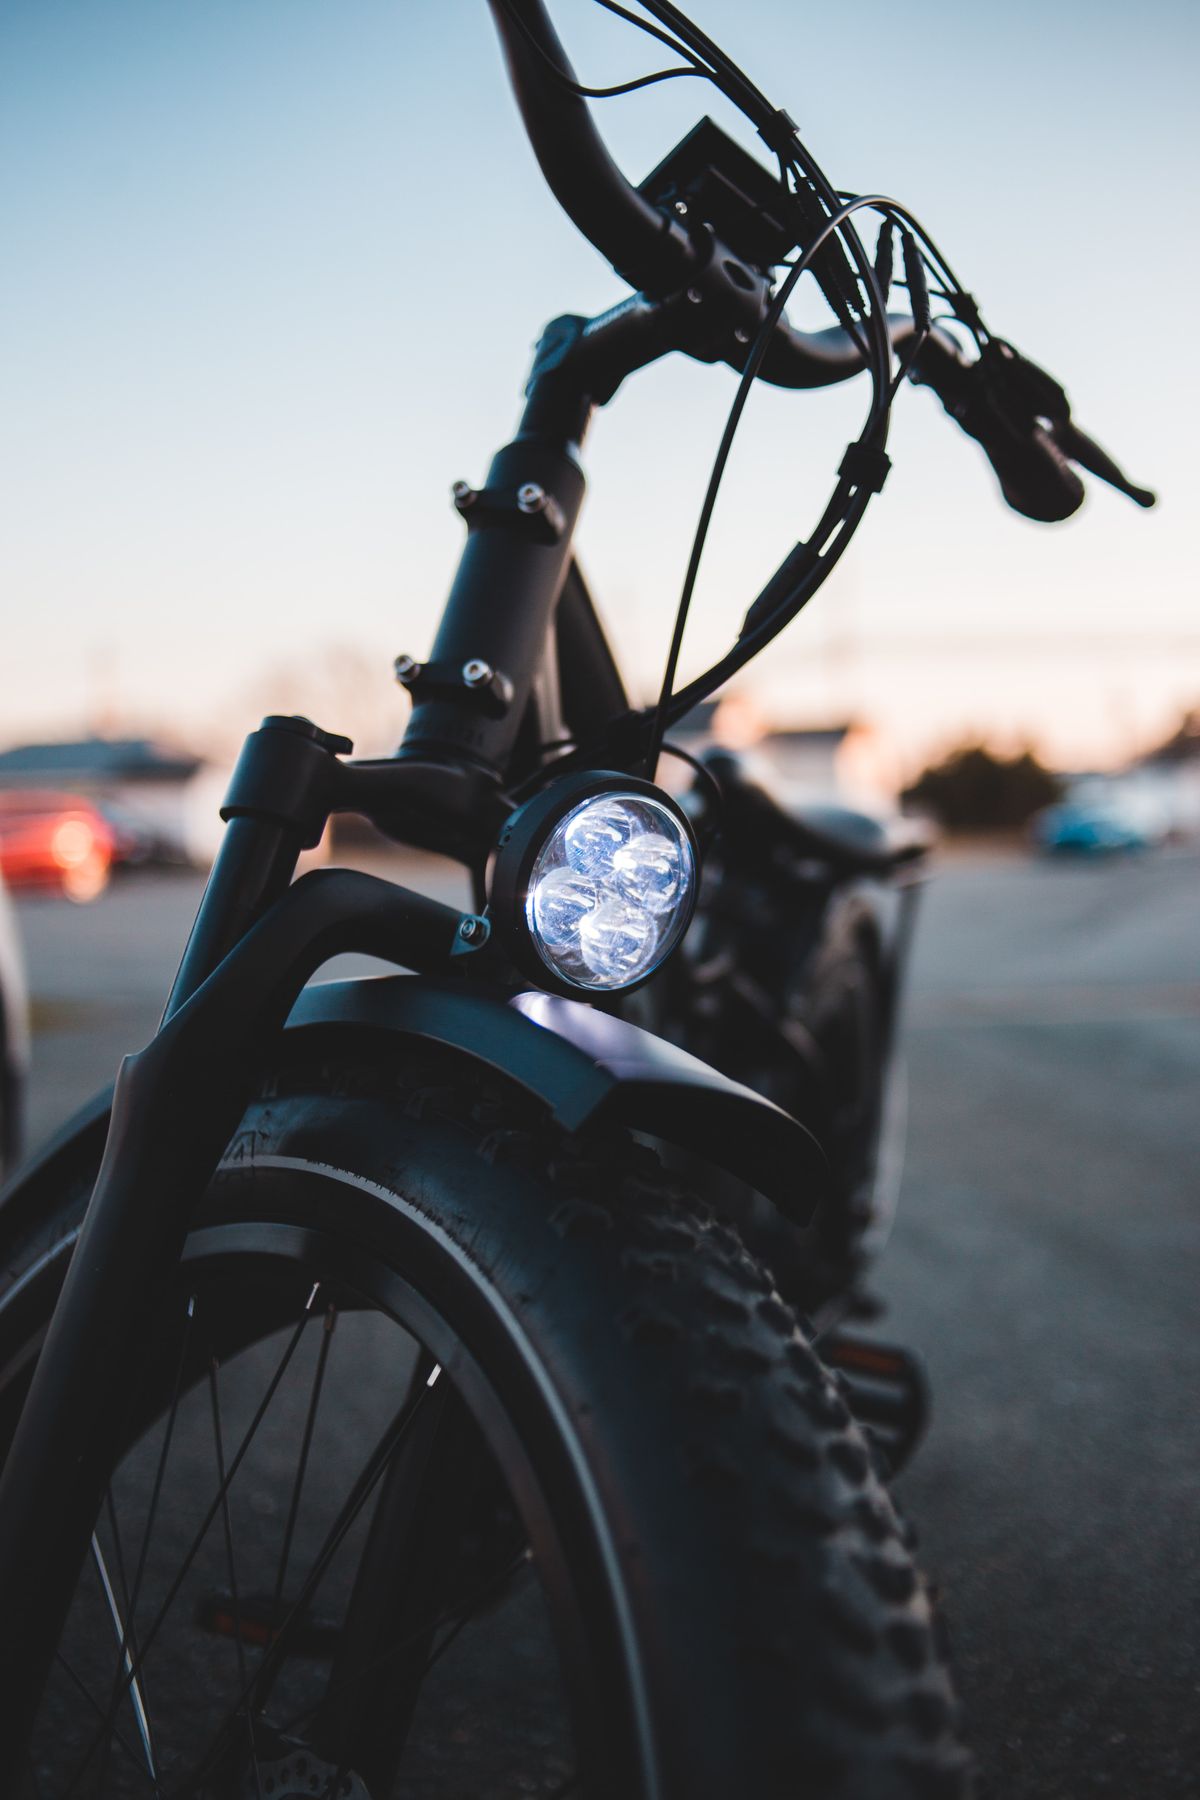 Issue #10: Ebike Growth Trends Are Still Poised for Growth